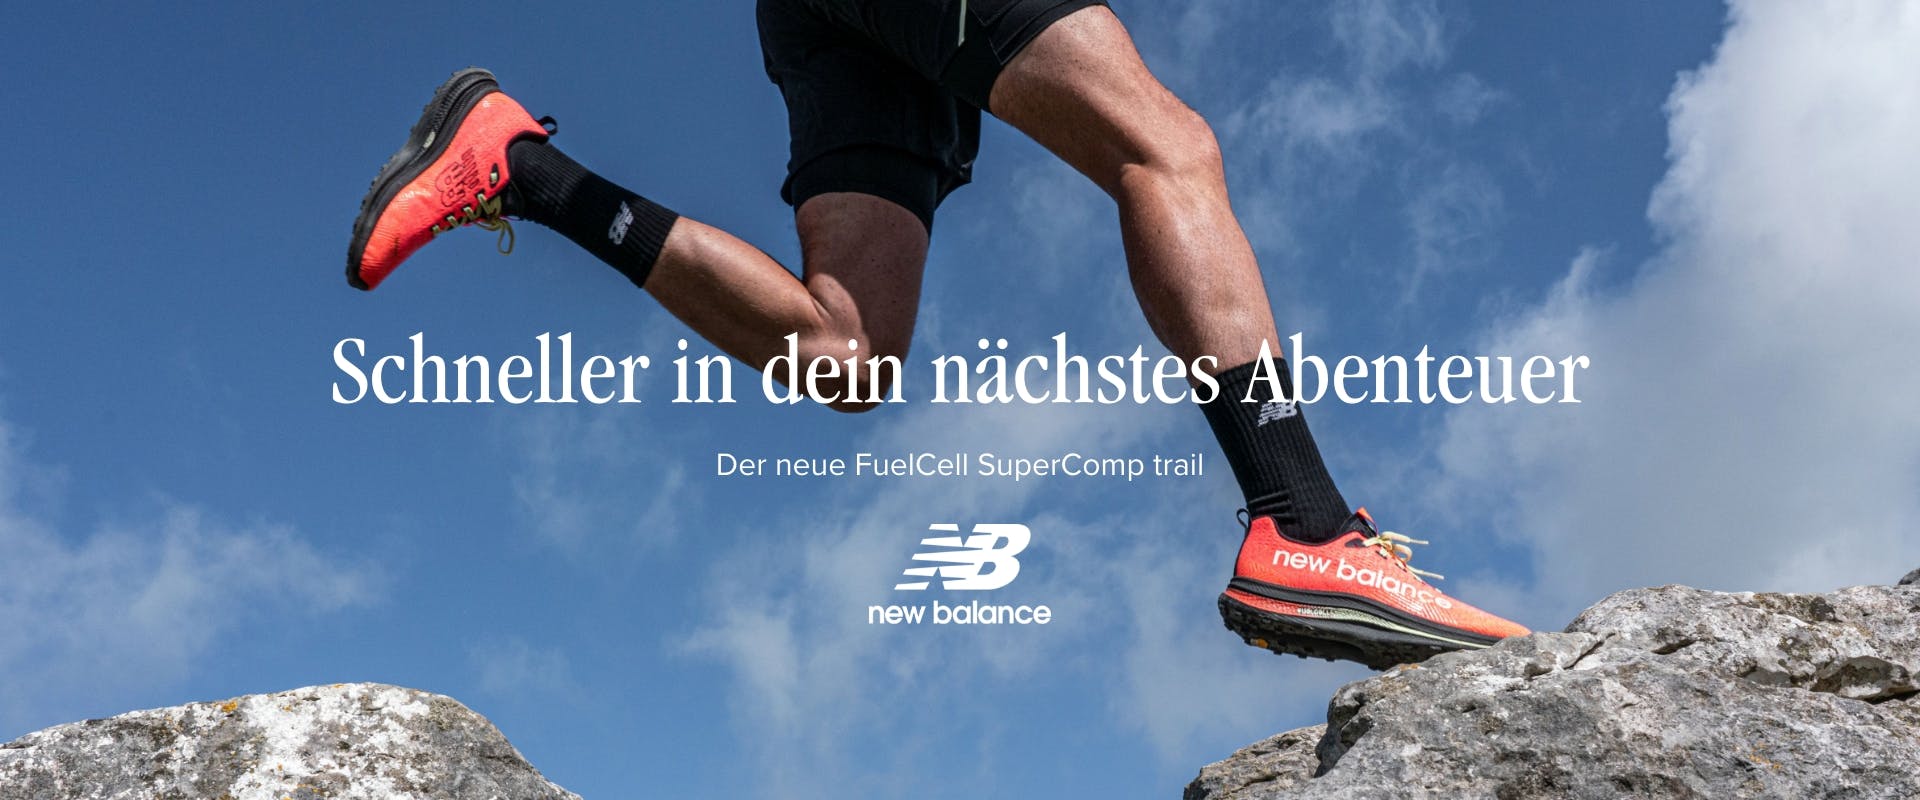 nb fuelcell supercomp trail